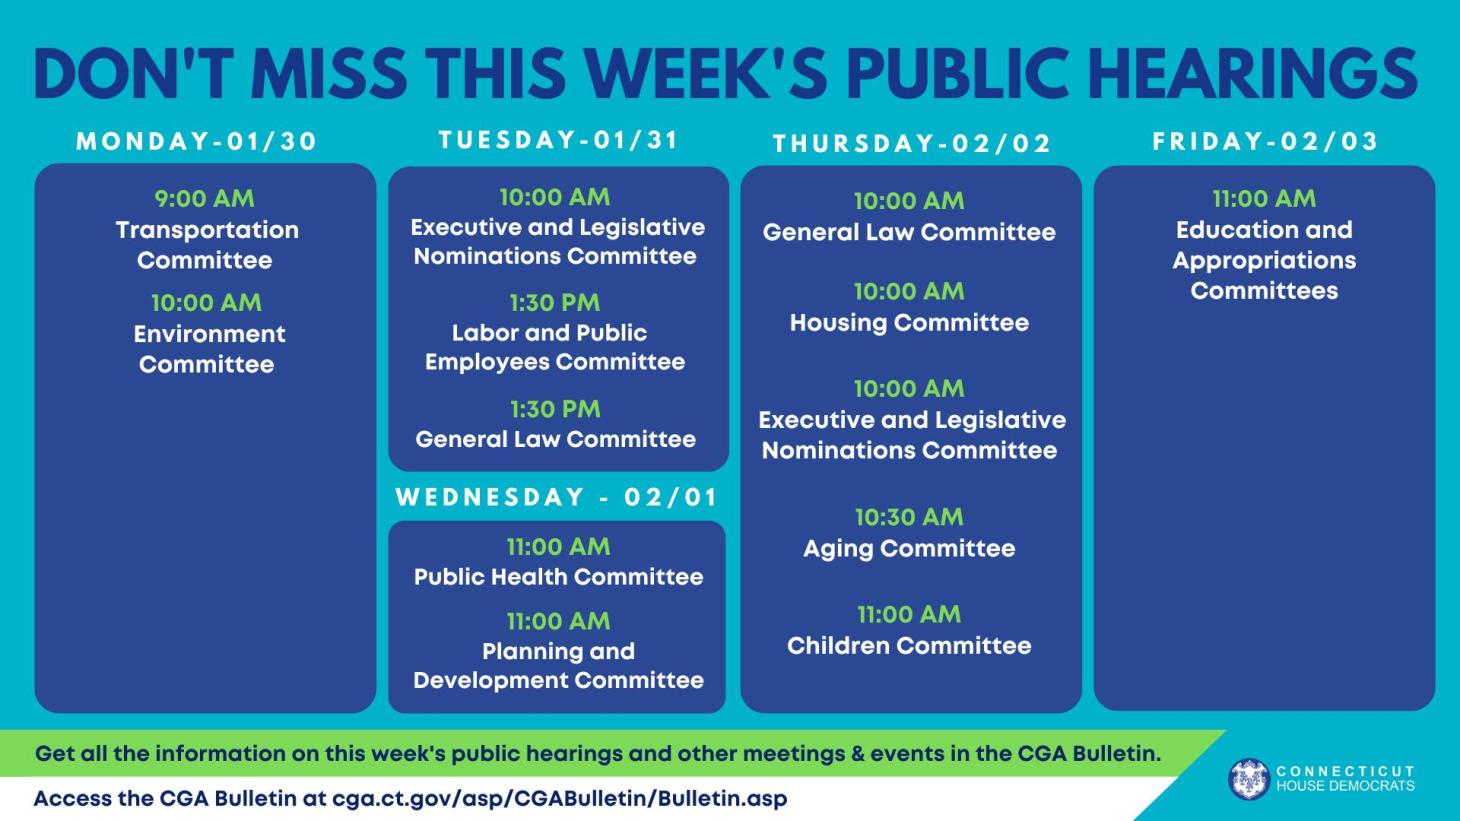 Public Hearings for the Week of January 30